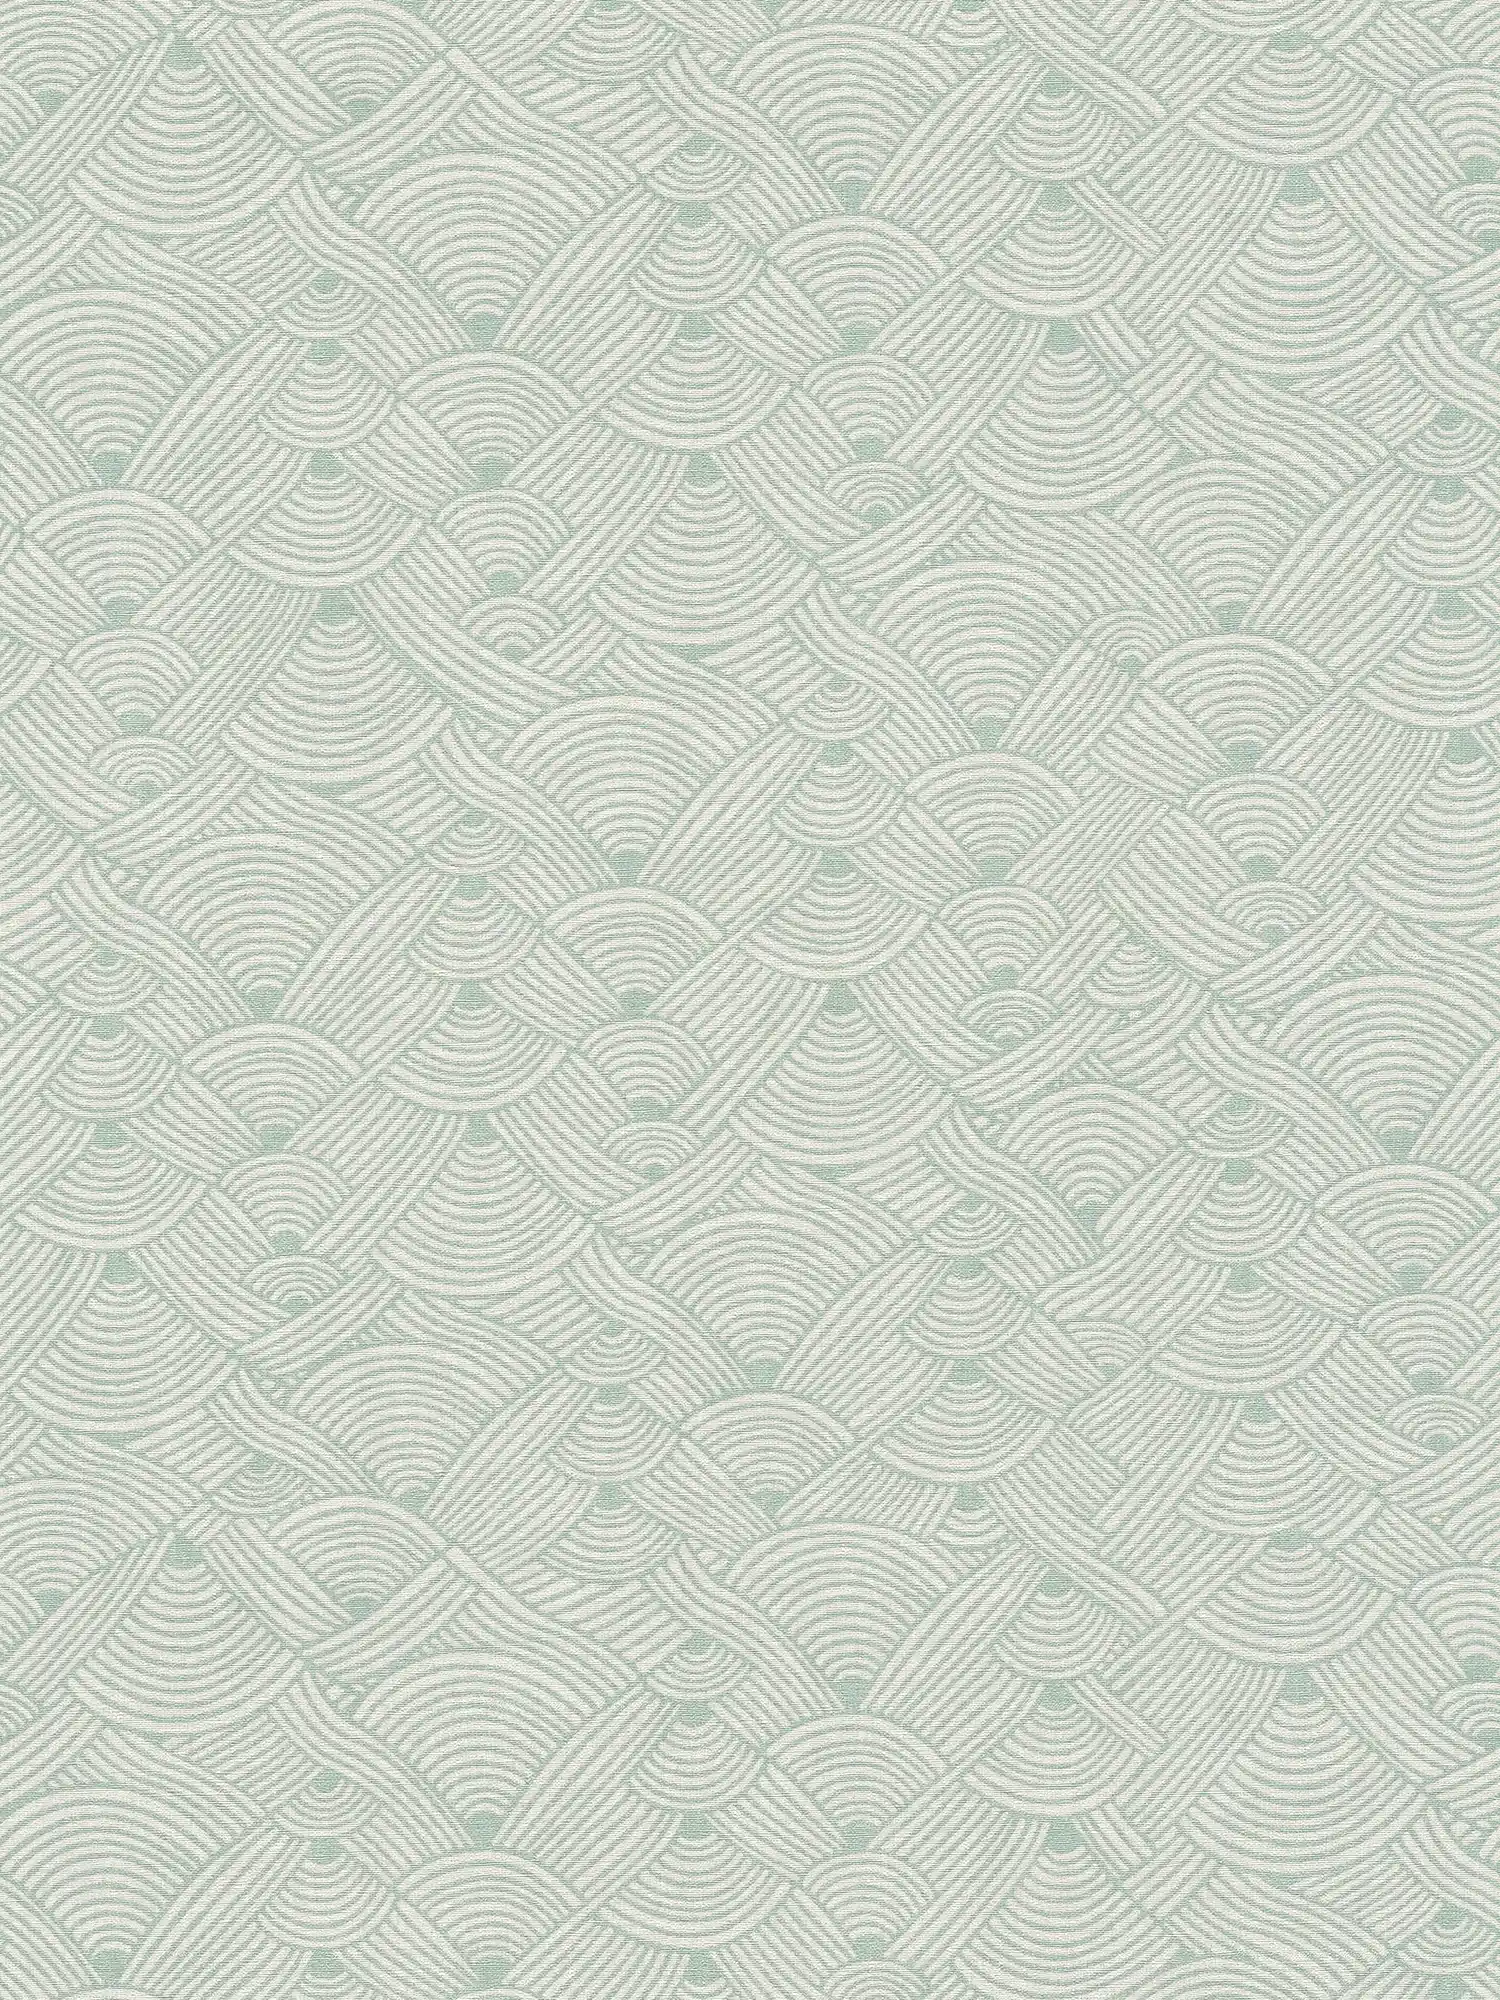 Graphic wallpaper wave pattern in earth colours - green, white, blue
